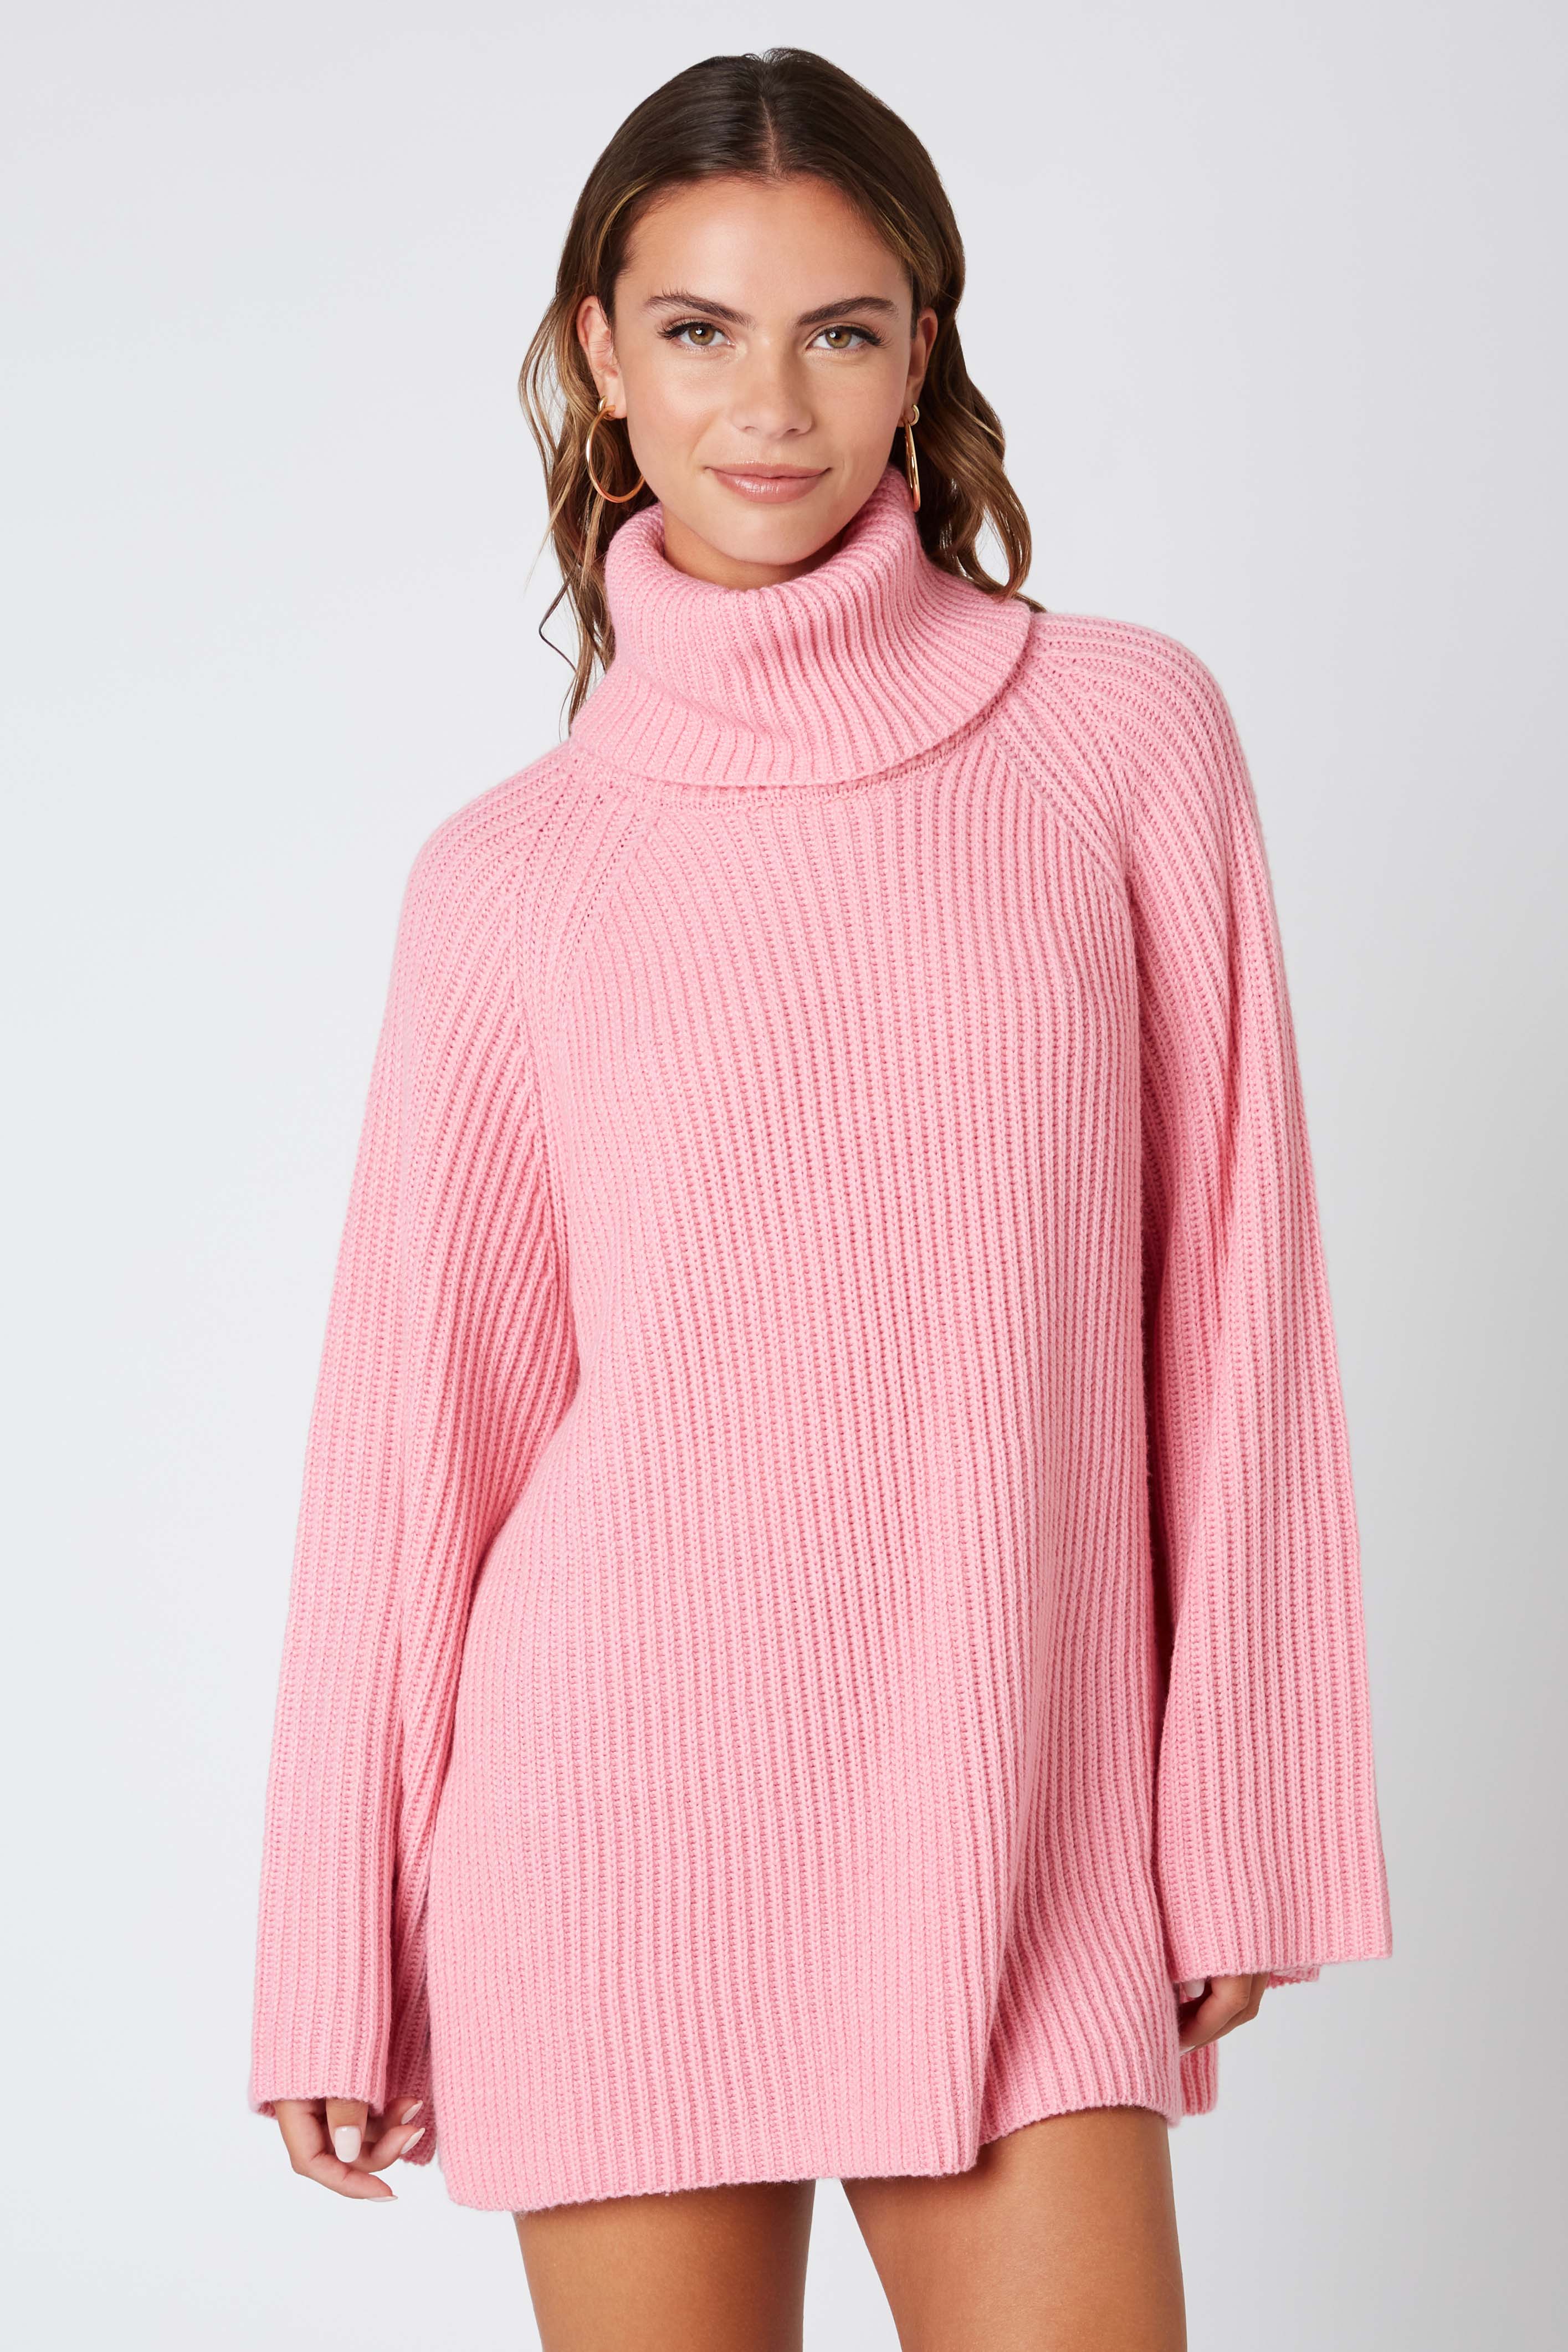 Oversized Turtleneck Sweater in Pink Front View